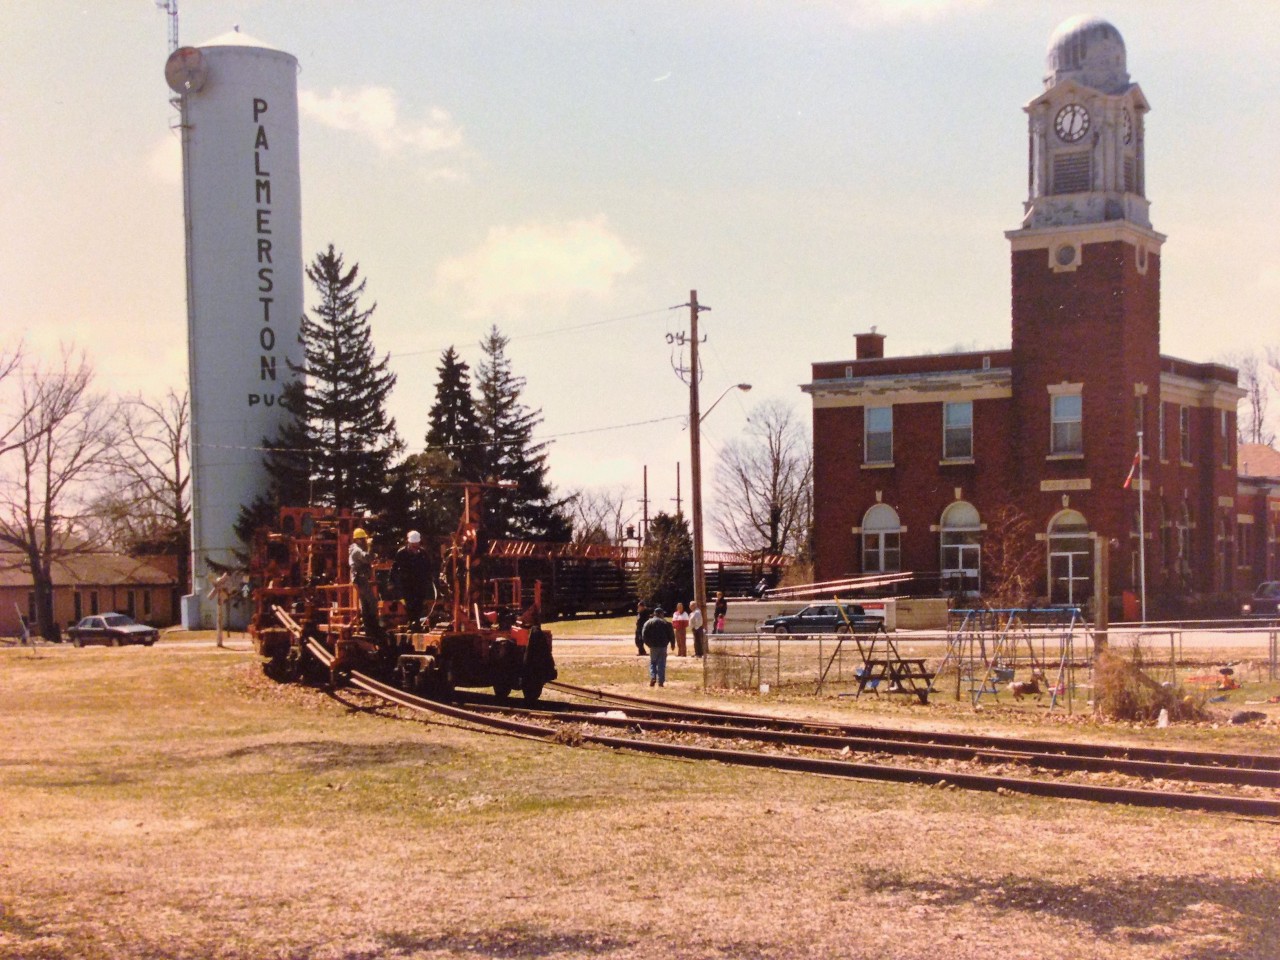 On a sunny spring day in April 1996, several onlookers gather to watch as CN GP9RM’s 4115 and 4140 slowly haul a lengthy rail train through Palmerston, Ontario, literally taking more than 100 years of railway history with it. On this day, the CN rail train would remove several sections of the once thriving Newton Subdivision as it made its way towards Stratford one town at a time. During that month, CN removed the rails that linked Harriston with the festival city of Stratford and never looked back, creating another void in the Ontario railway landscape and securing the Newton Subdivision’s future in the history books. Photo by Carl Noe.